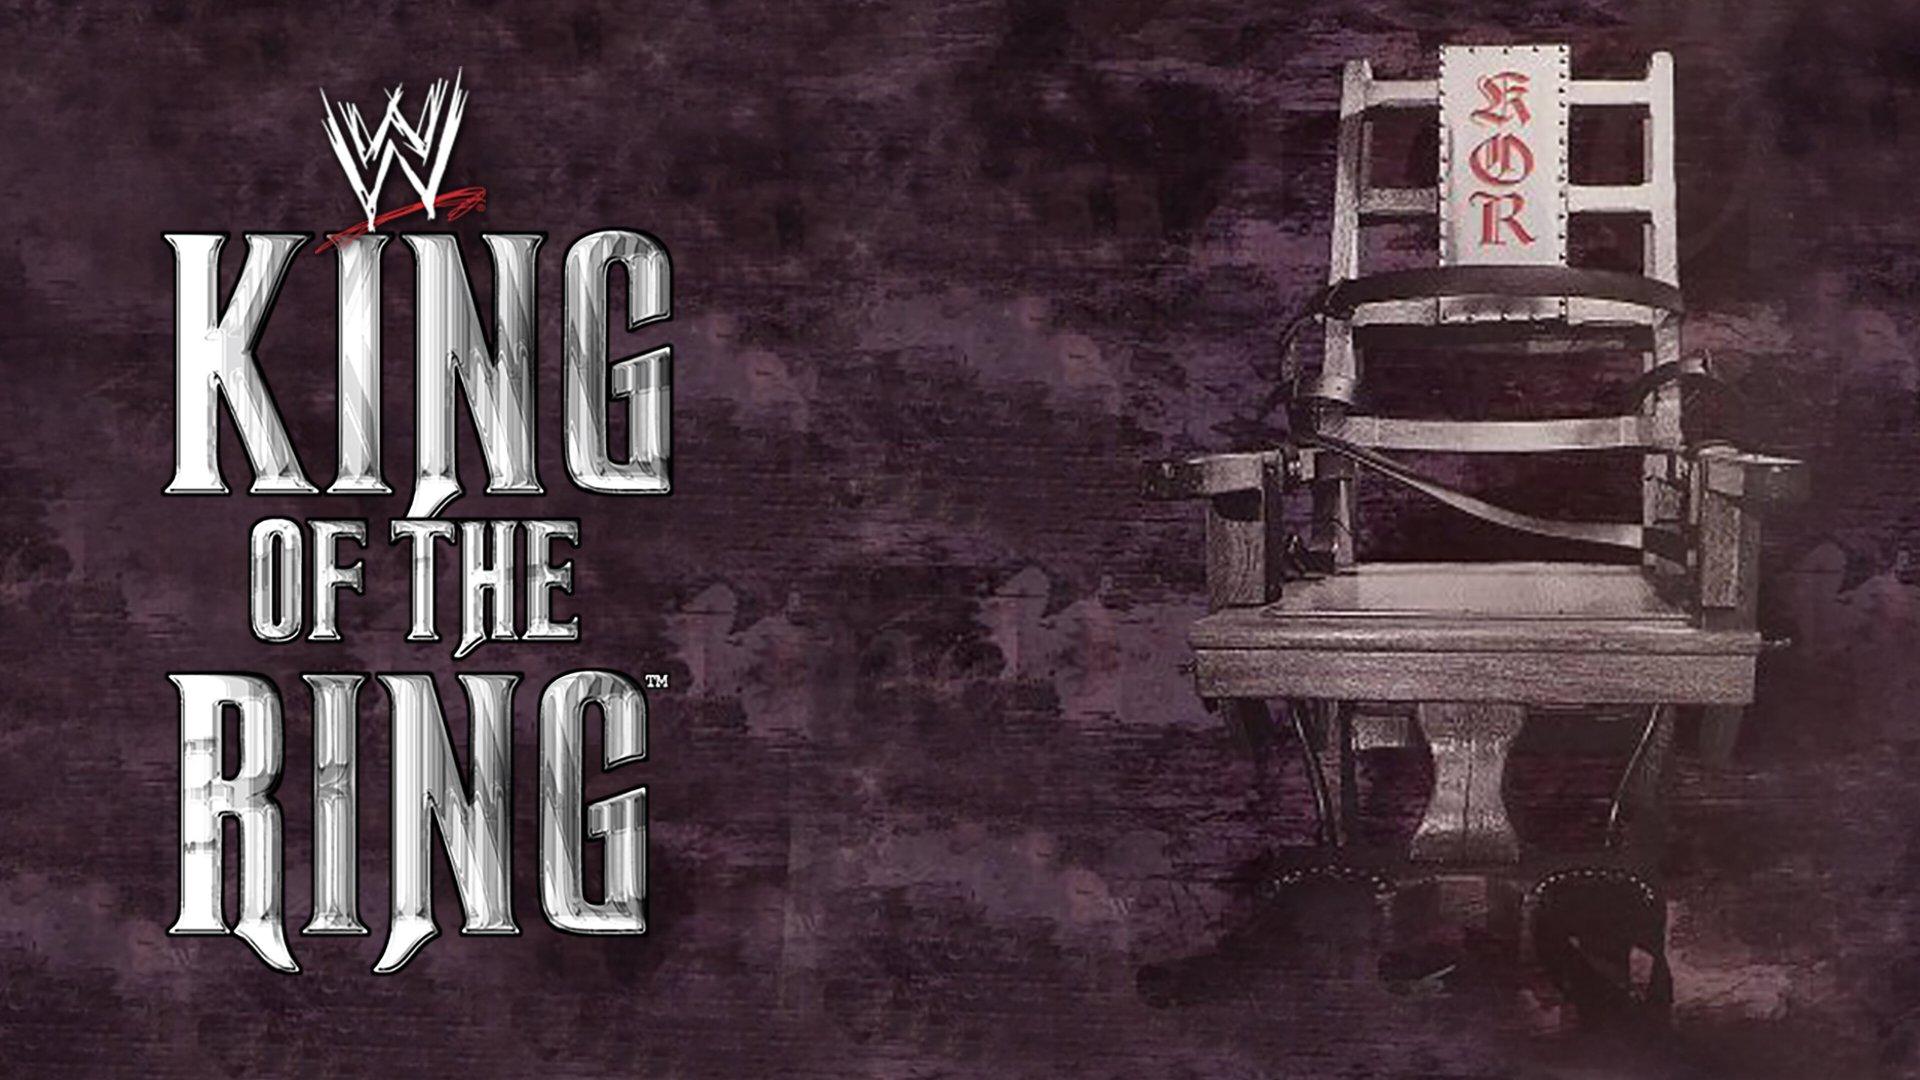 WWF King of the Ring 2001